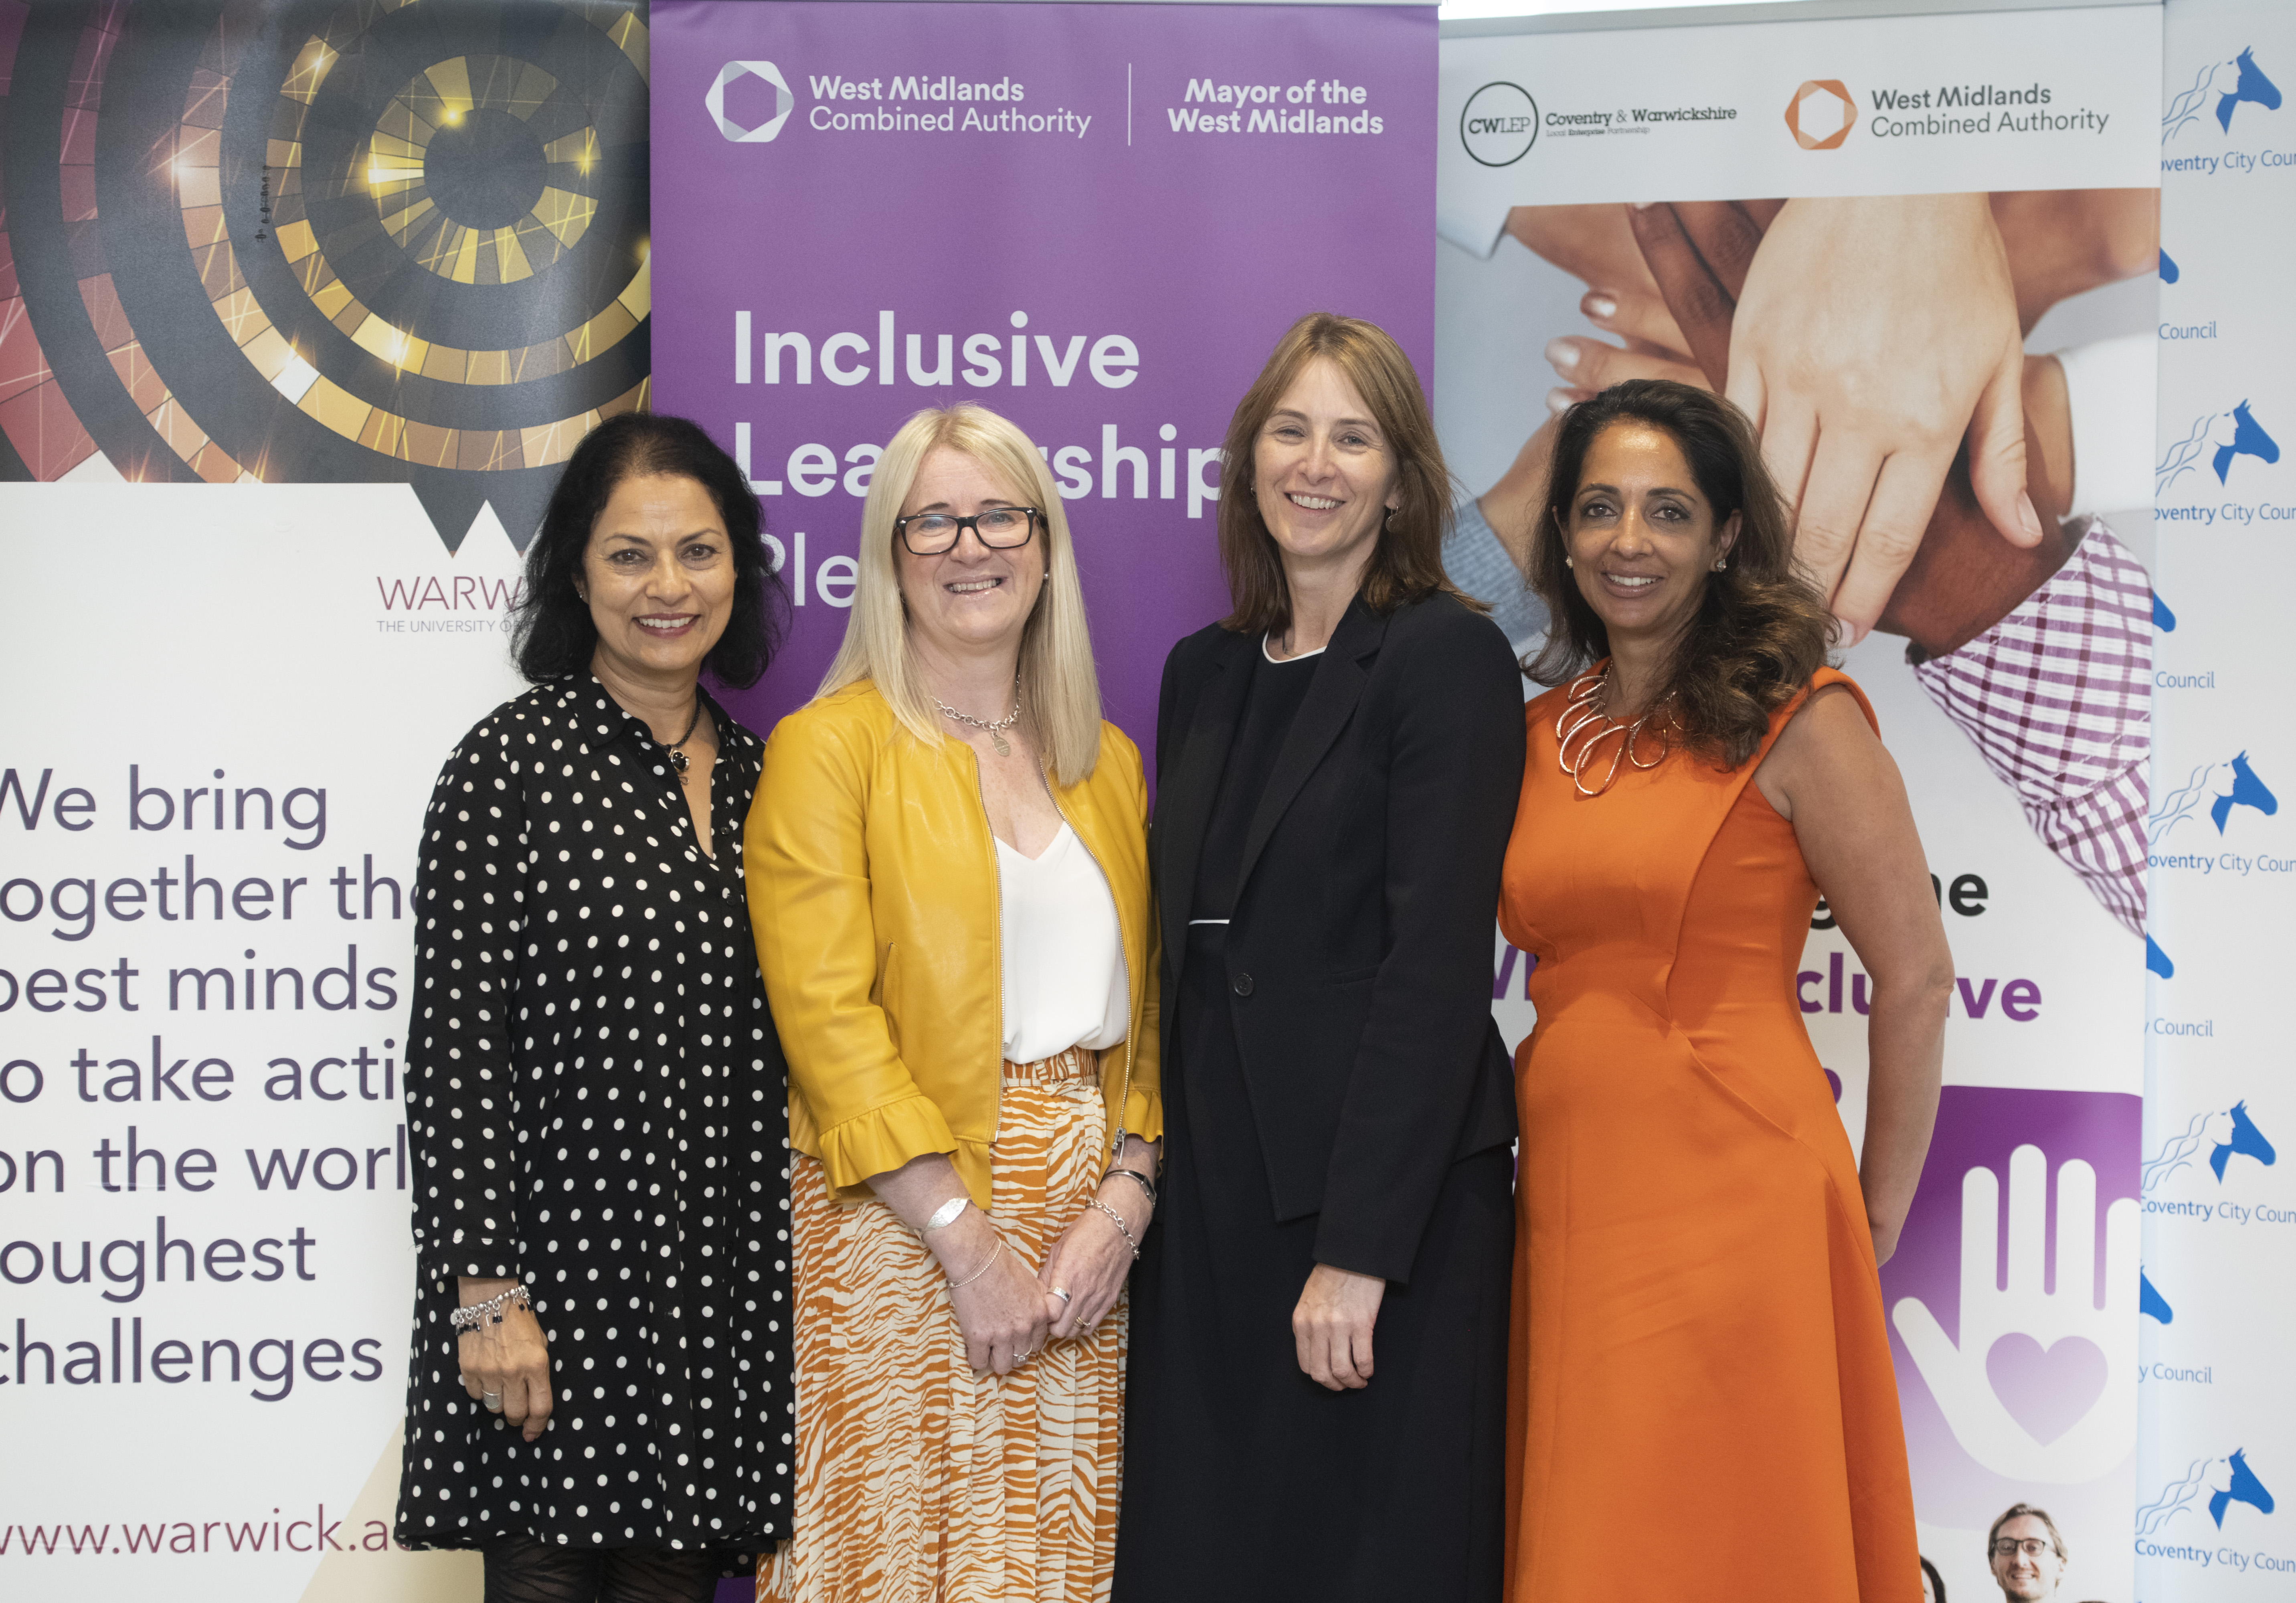 Anita Bhalla OBE, chair of the Leadership Commission, Paula Deas from Coventry and Warwickshire Local Enterprise Partnership, Gail Quinton from Coventry City Council and Kulbir Shergill from Warwick University, at the launch of the Inclusive Leadership Pledge in Coventry